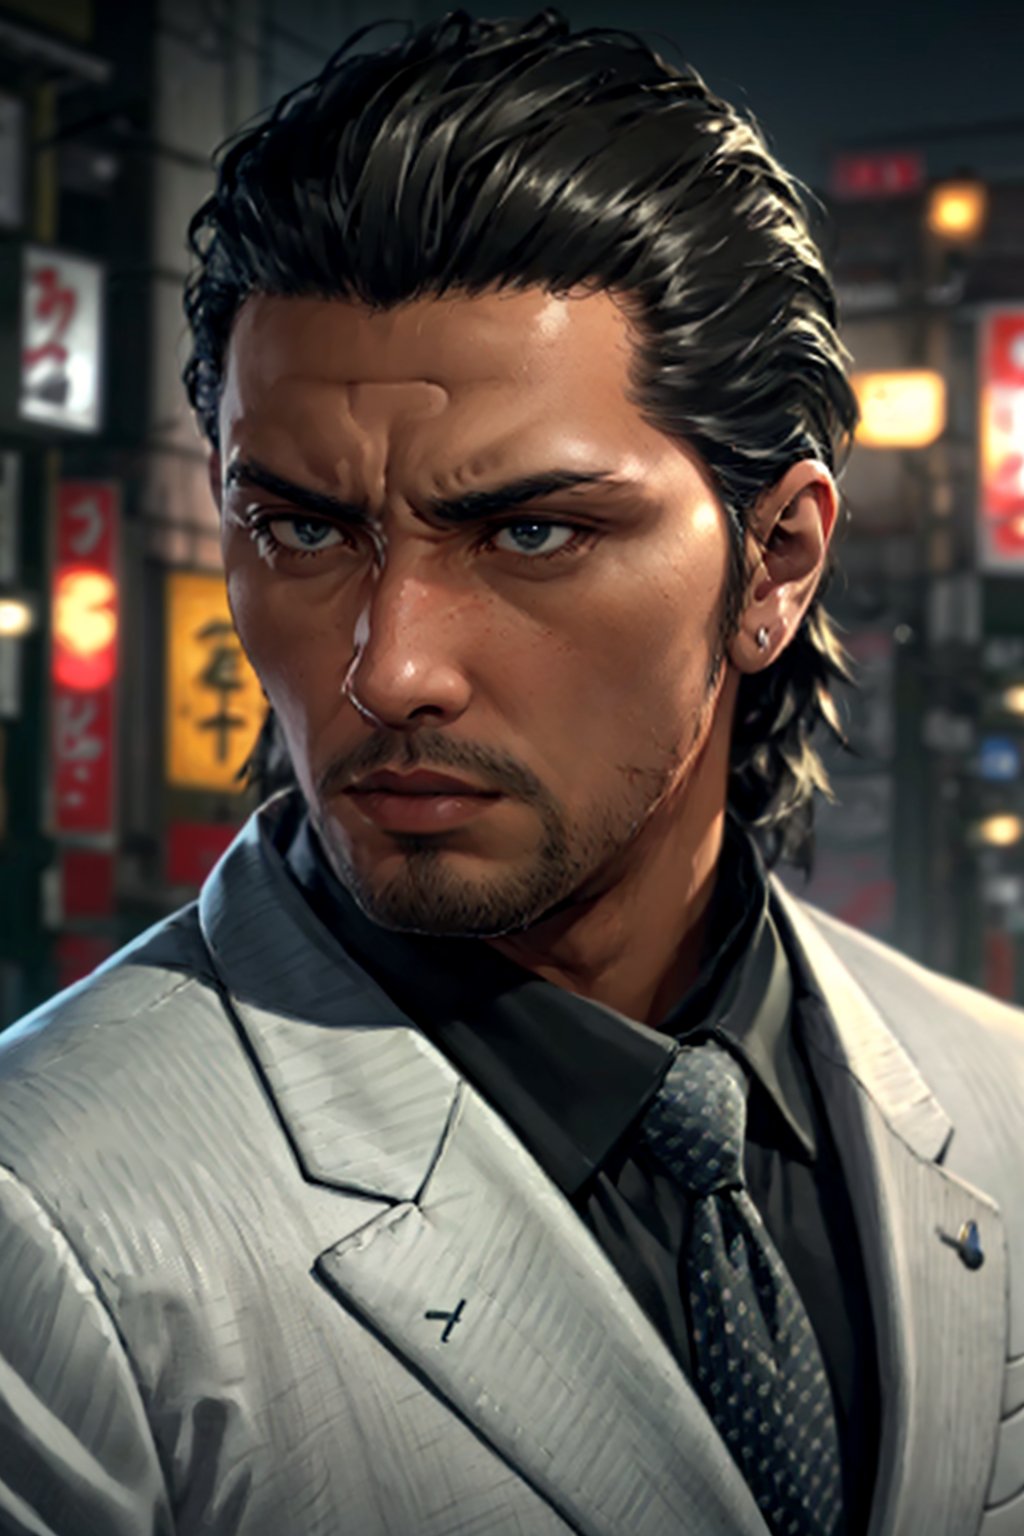 (1 image only), solo male, 1boy, Daigo Dojima, Yakuza, 34 years old, Asian, Japanese, black hair, short hair, slicked back hair, stubble, handsome, white collared shirt, (black suit jacket:1.2), black necktie, fit body, mature, manly, hunk, masculine, virile, confidence, charming, alluring, upper body in frame, night at Kabukicho Tokyo, perfect anatomy, perfect proportions, 8k, HQ, (best quality:1.5, hyperrealistic:1.5, photorealistic:1.4, madly detailed CG unity 8k wallpaper:1.5, masterpiece:1.3, madly detailed photo:1.2), (hyper-realistic lifelike texture:1.4, realistic eyes:1.2), high_resolution, picture-perfect face, perfect eye pupil, detailed eyes, perfecteyes,perfecteyes,Daigo Dojima 